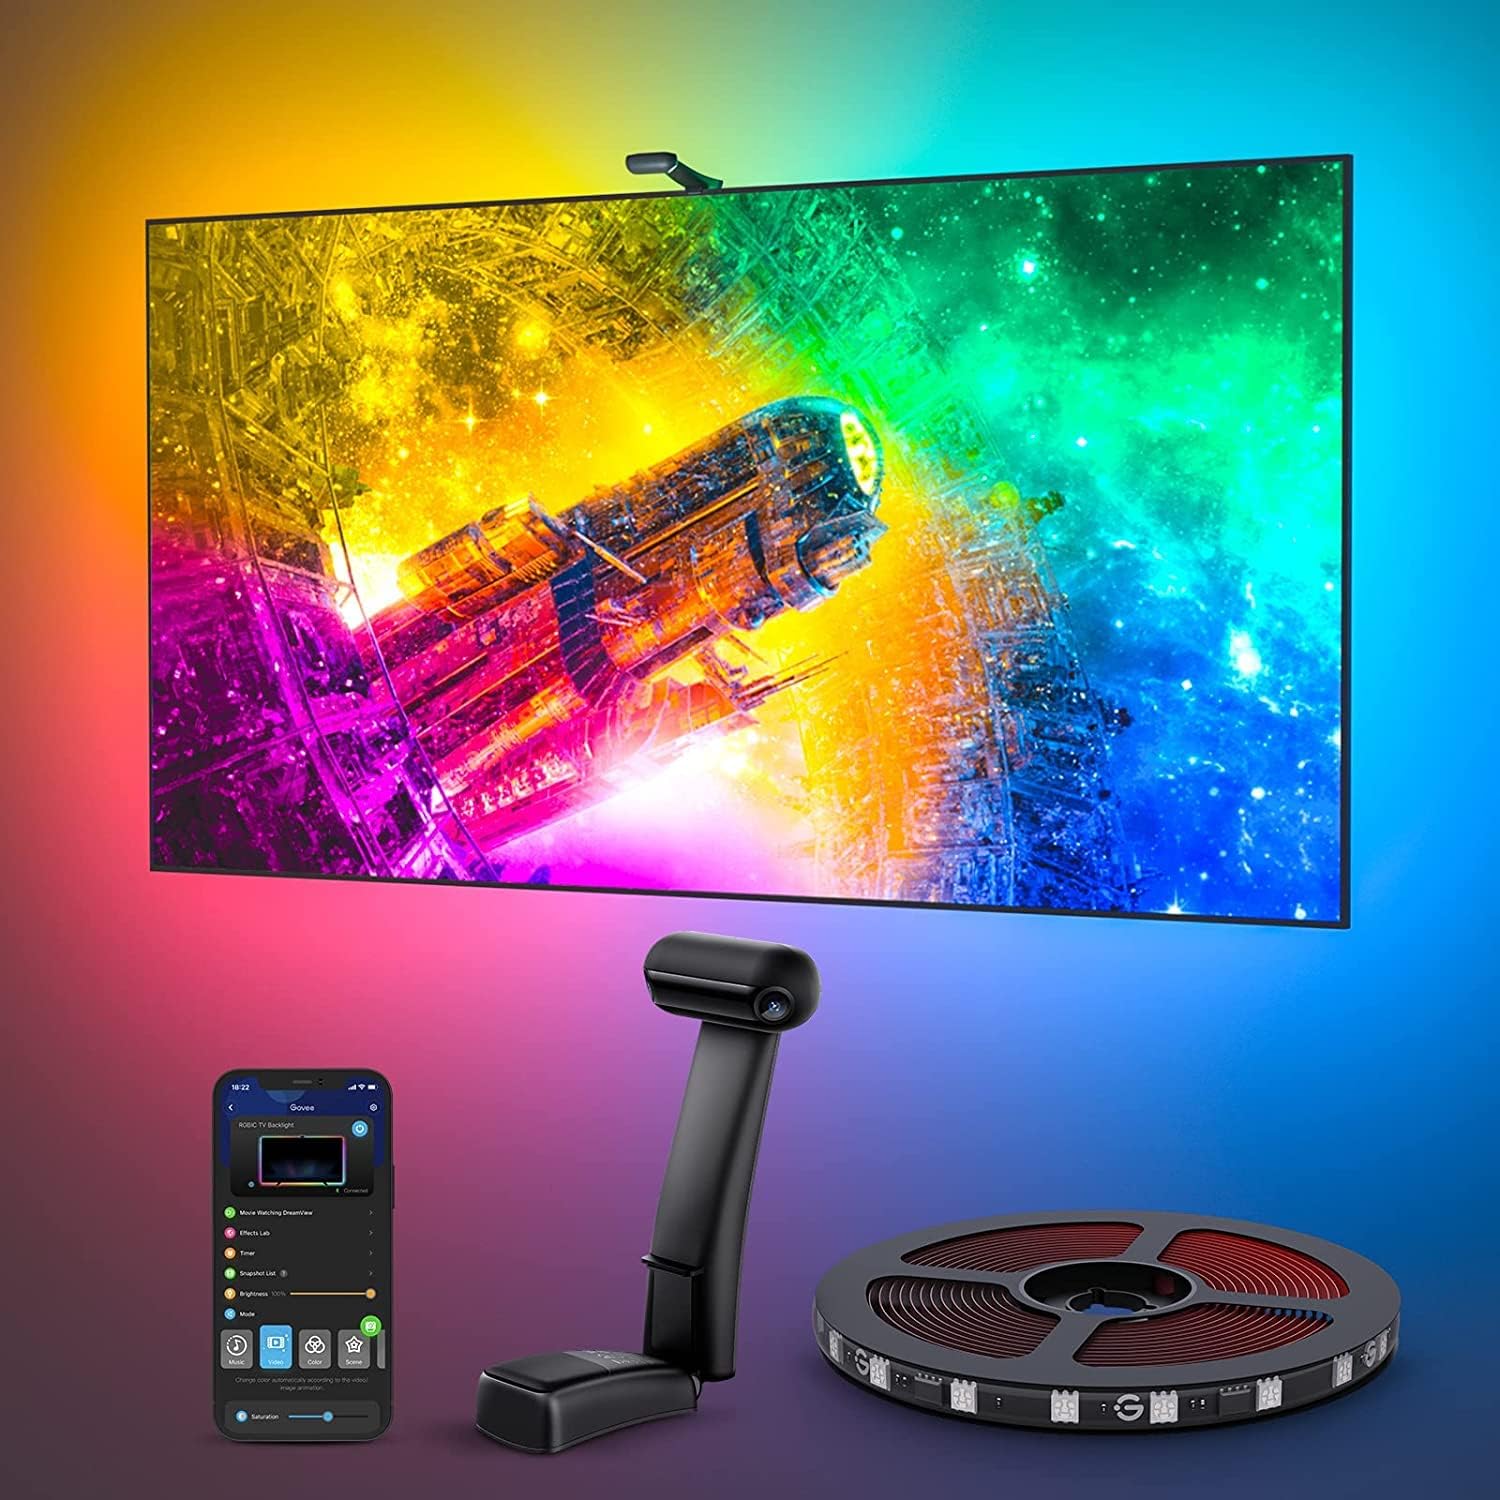 Govee Envisual TV LED Backlight with Dual Cameras 11.8ft RGBIC Wi-Fi LED Strip Lights